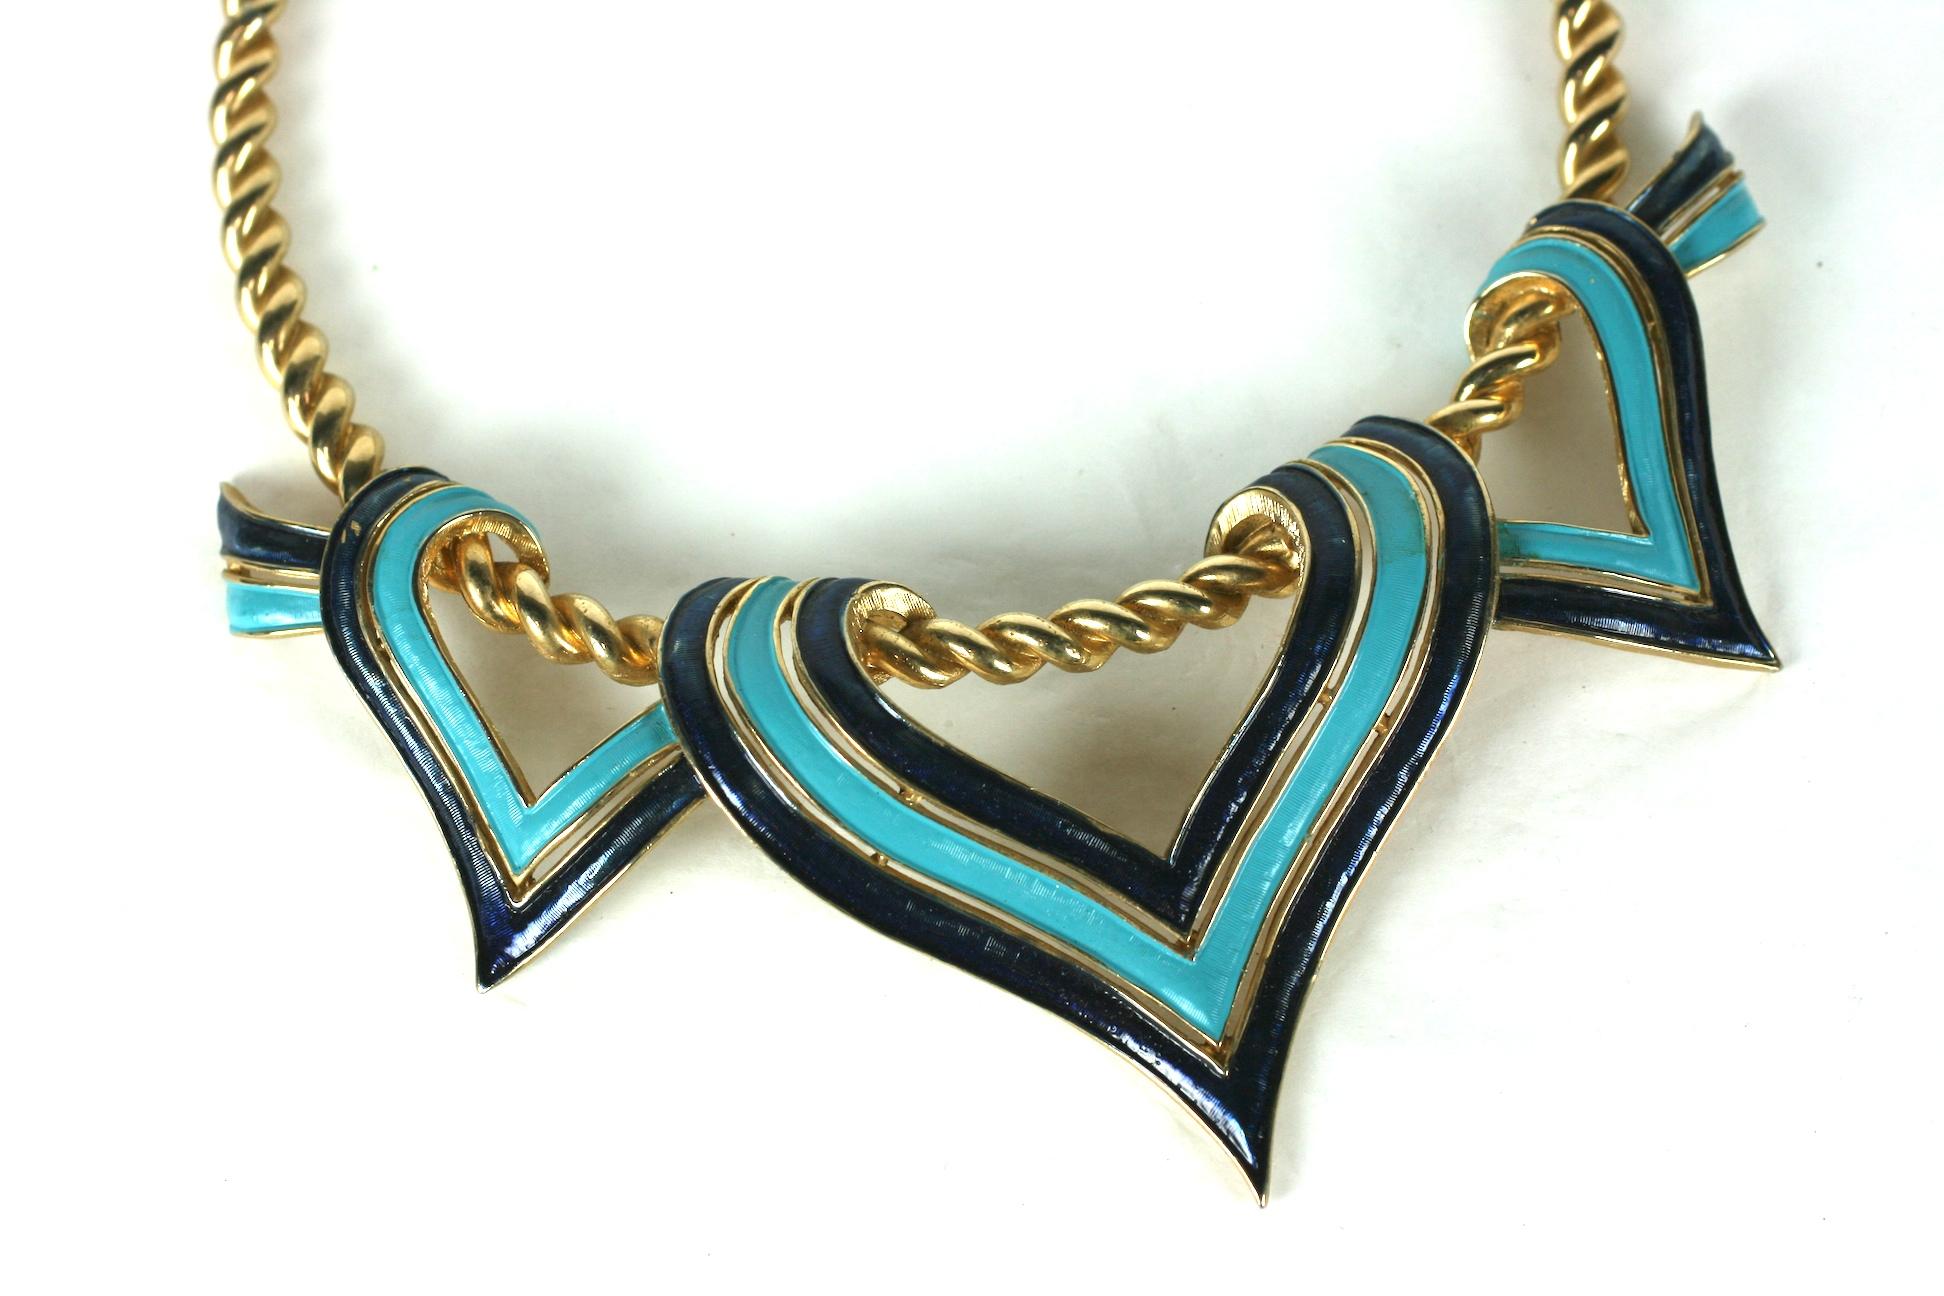 Unusual Marcel Boucher Enamel Scarf Necklace designed as a gilt coiled wire with enameled 